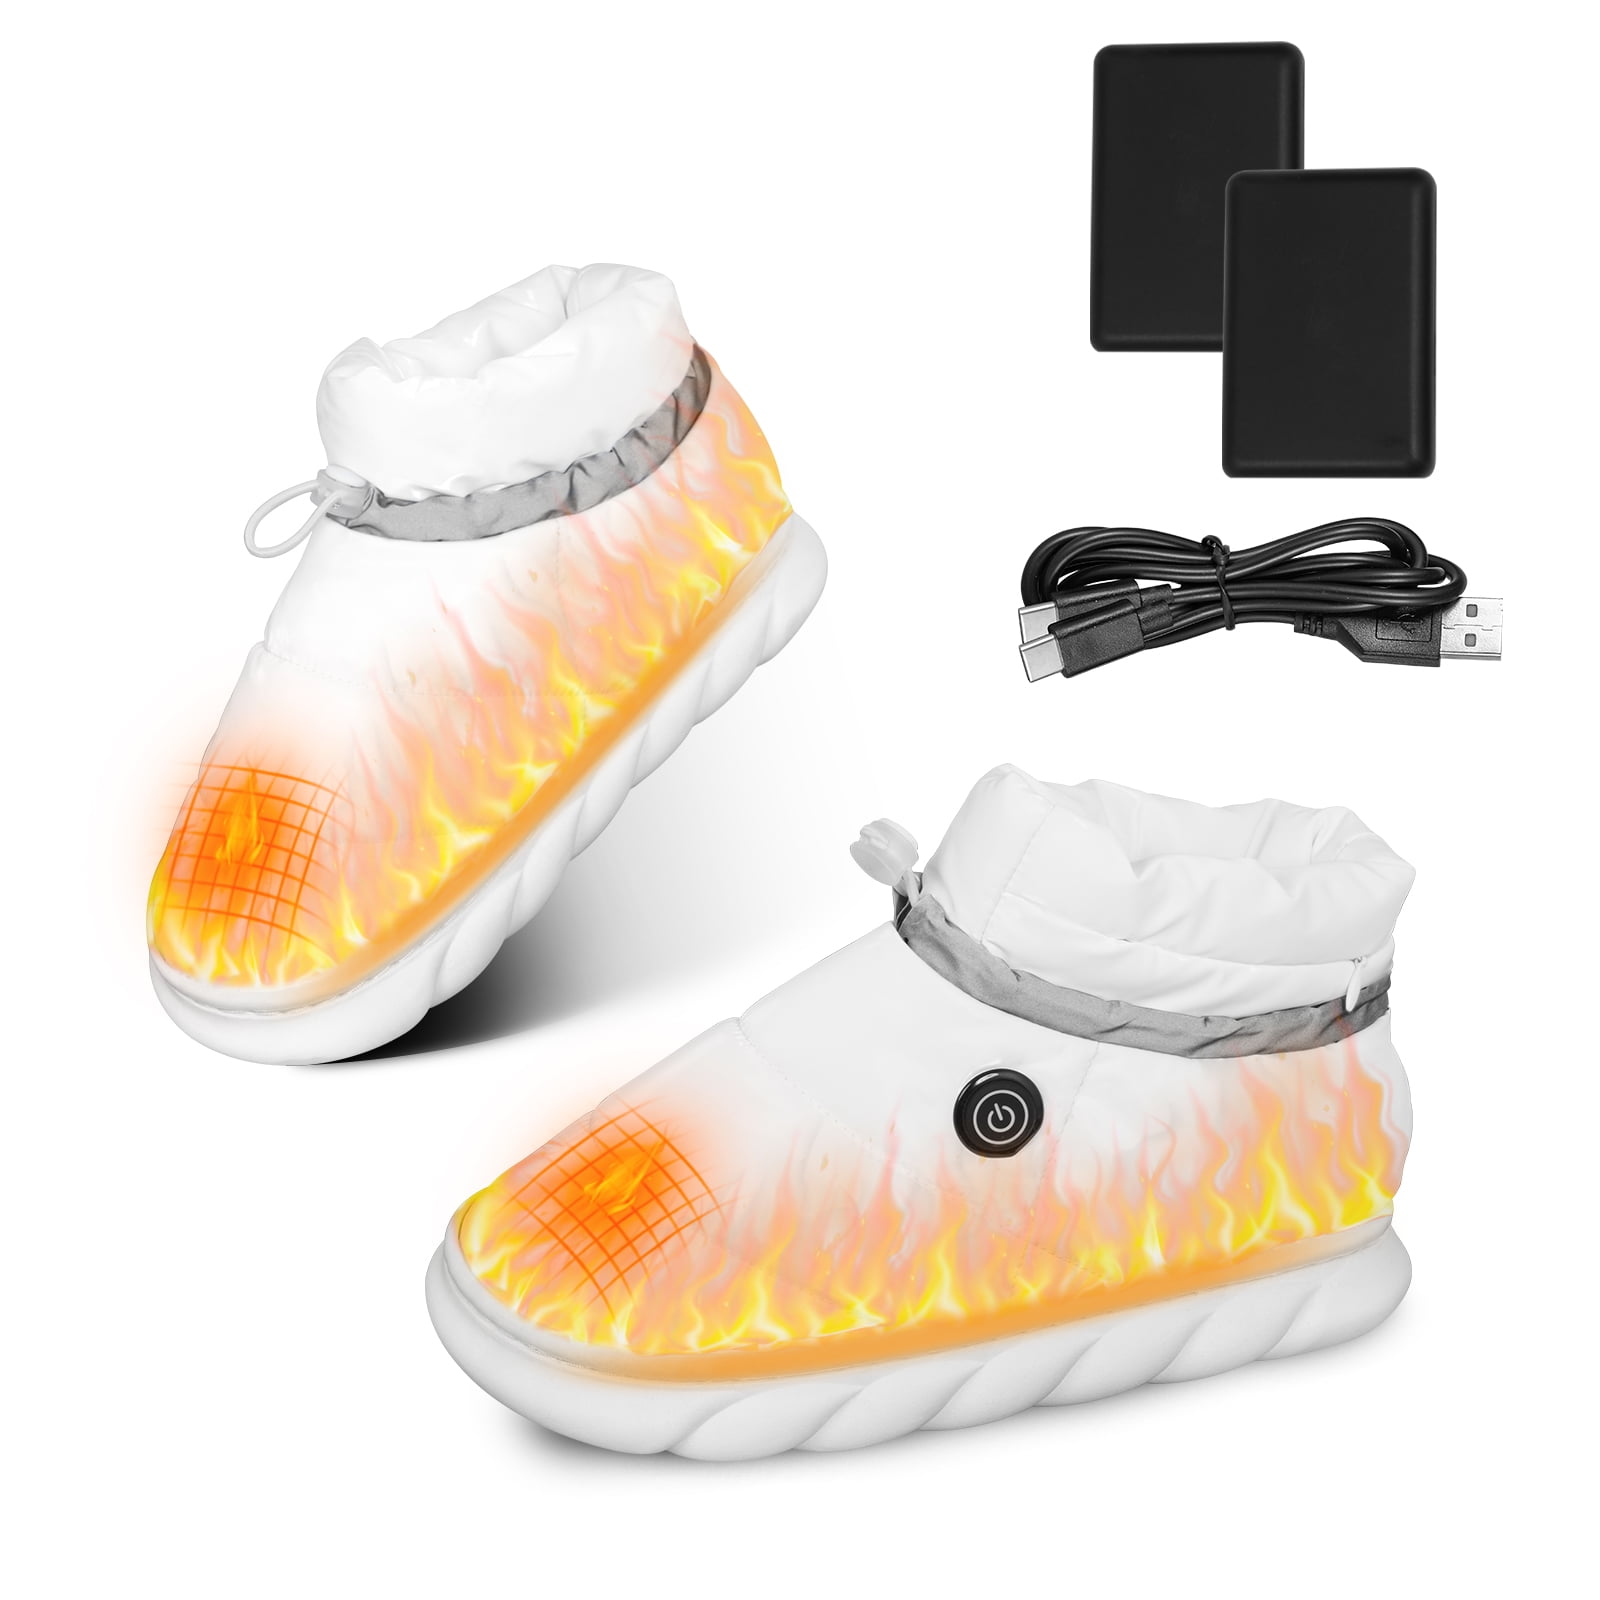 Heated Slippers Women Men High Top Foot Warmer Shoes with 5000mAh Battery for Winter White XL 42fe8d64 bc71 4fbd a148 cd5a8f989488.68144c4fe9164cac1597c8f01b77104d